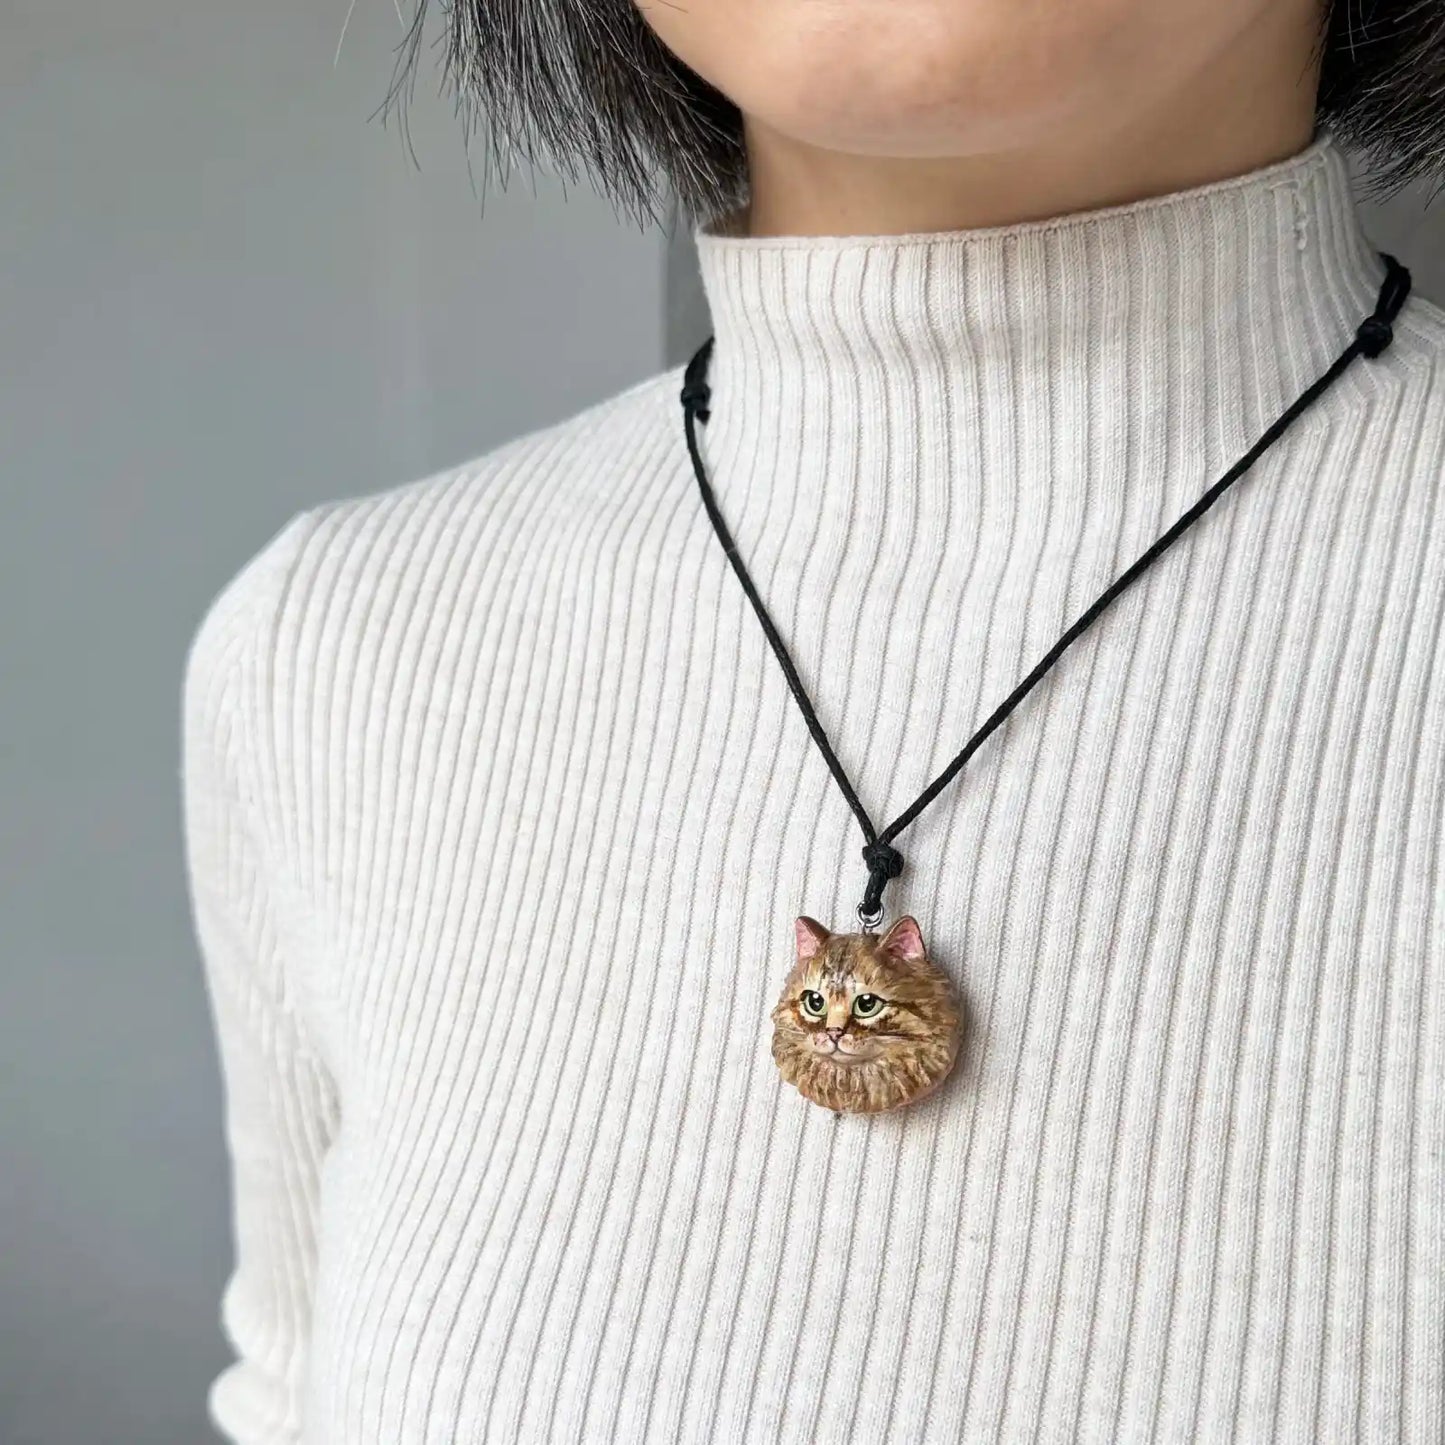 Siberian Pendant necklace | Brown Tabby